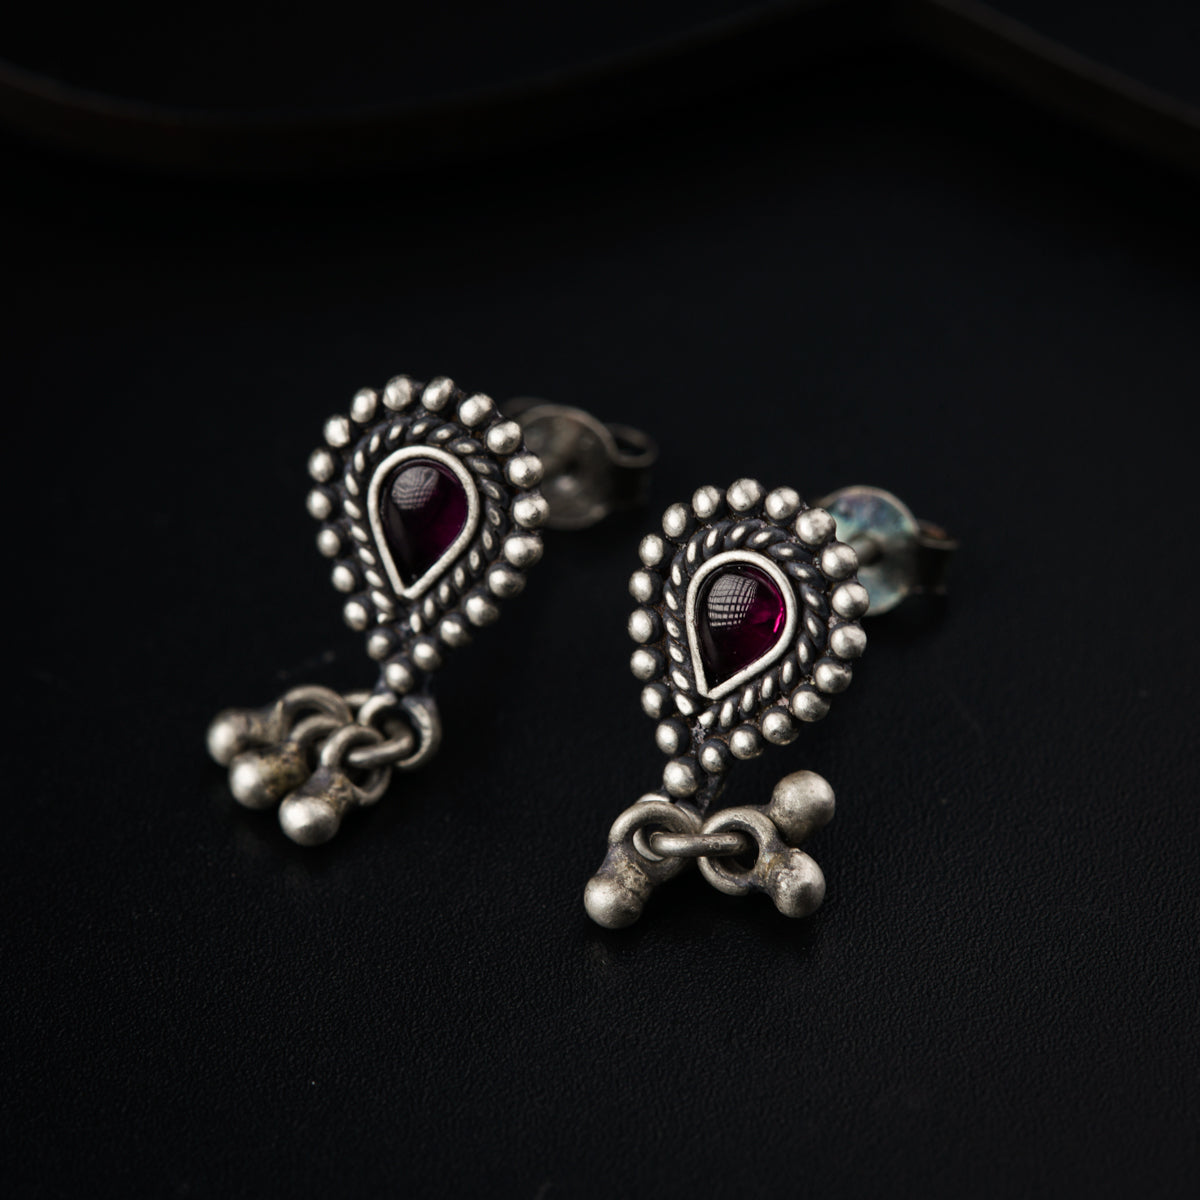 a pair of silver earrings with a heart shaped design